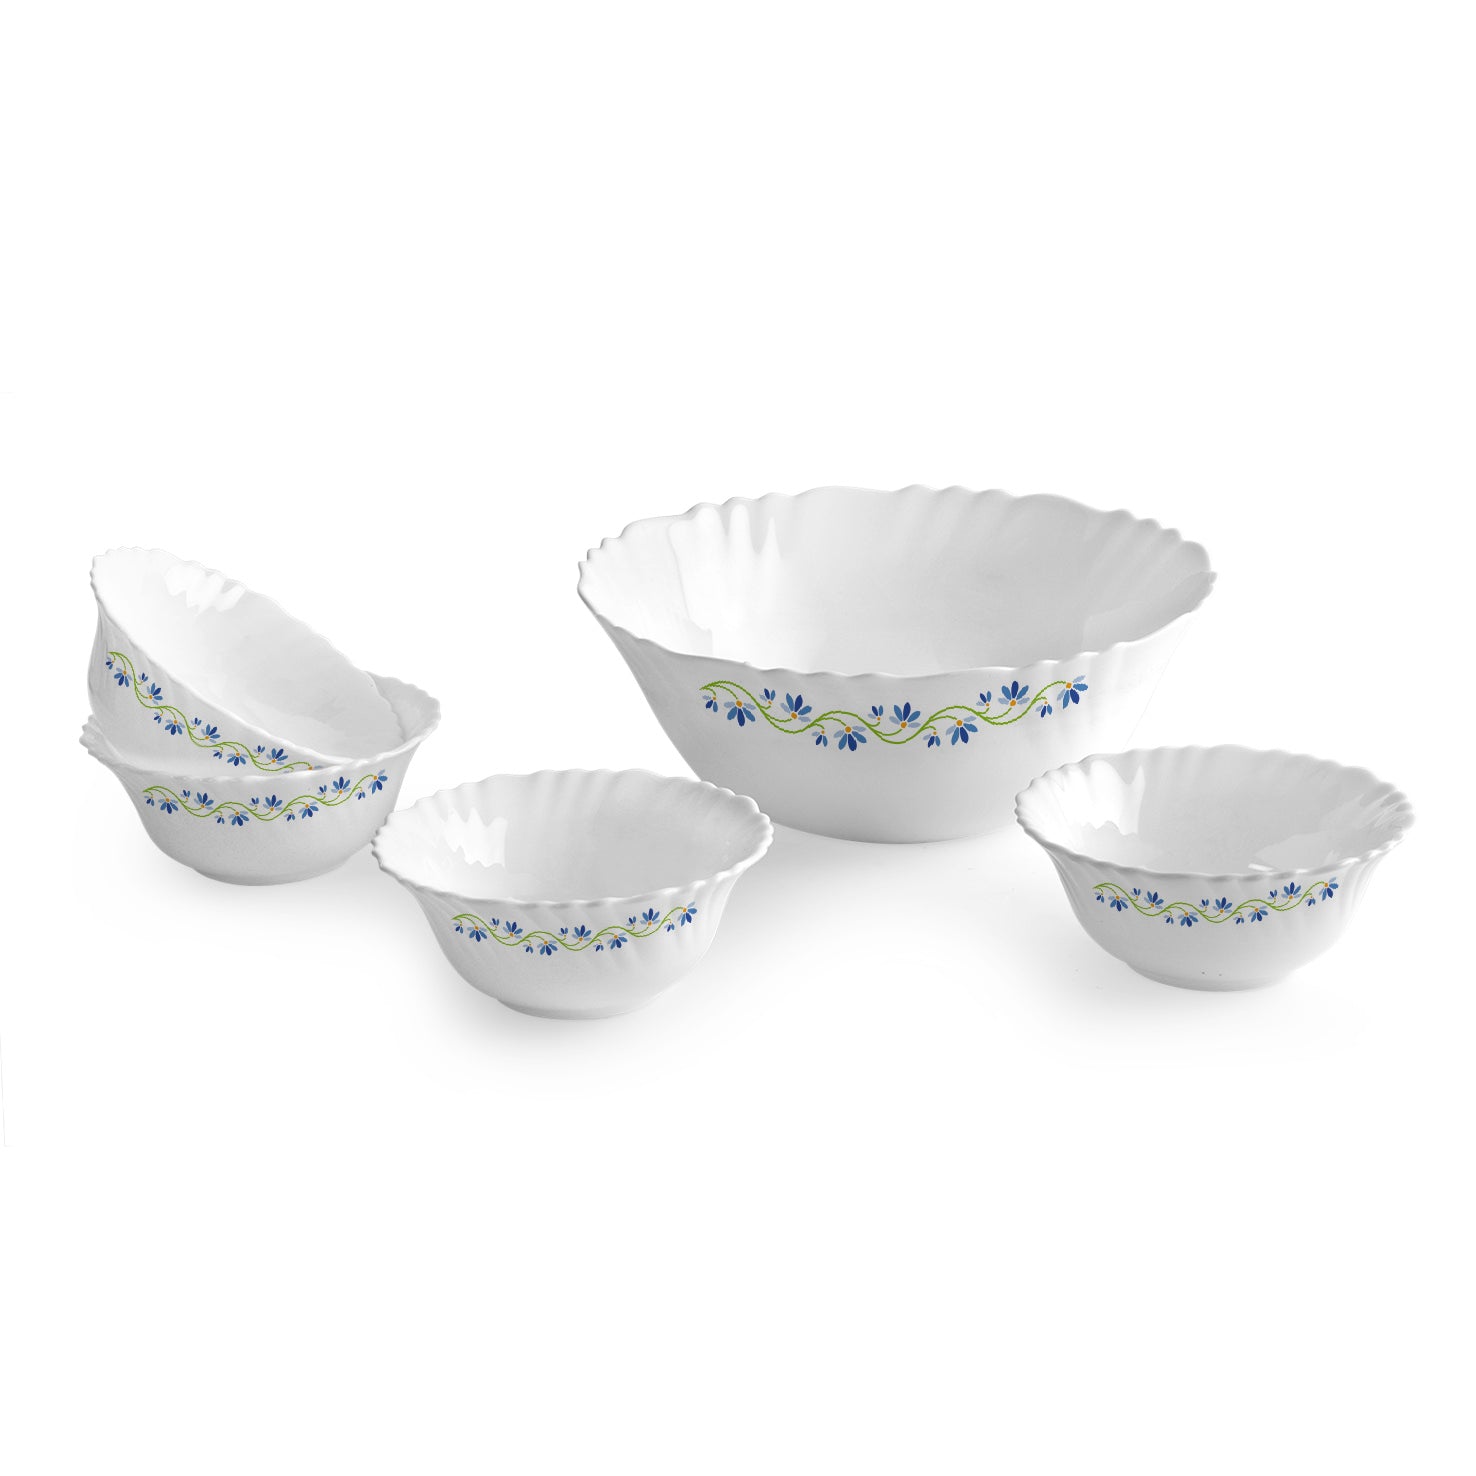 Imperial Series Dessert Set, 5 Pieces Morning Glory / 5 Pieces